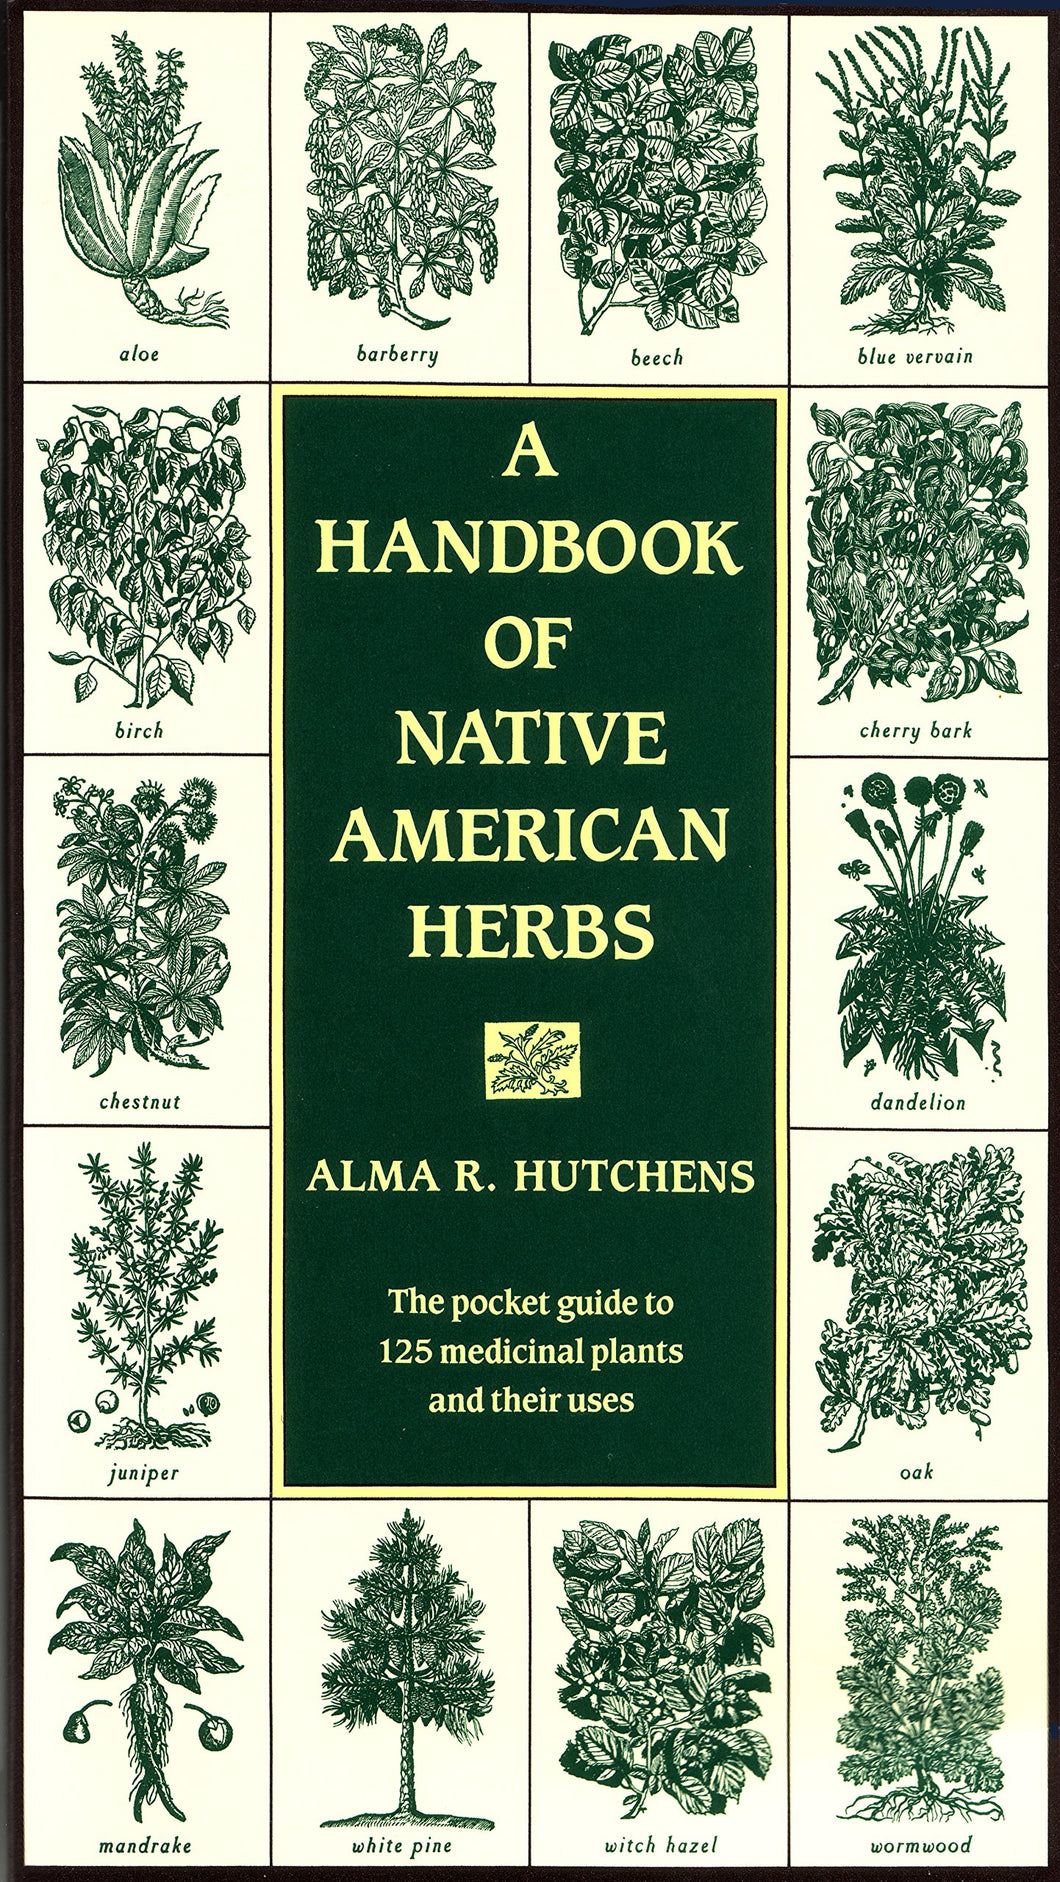 A Handbook of Native American Herbs: The Pocket Guide to 125 Medicinal Plants and Their Uses [Alma R. Hutchens]